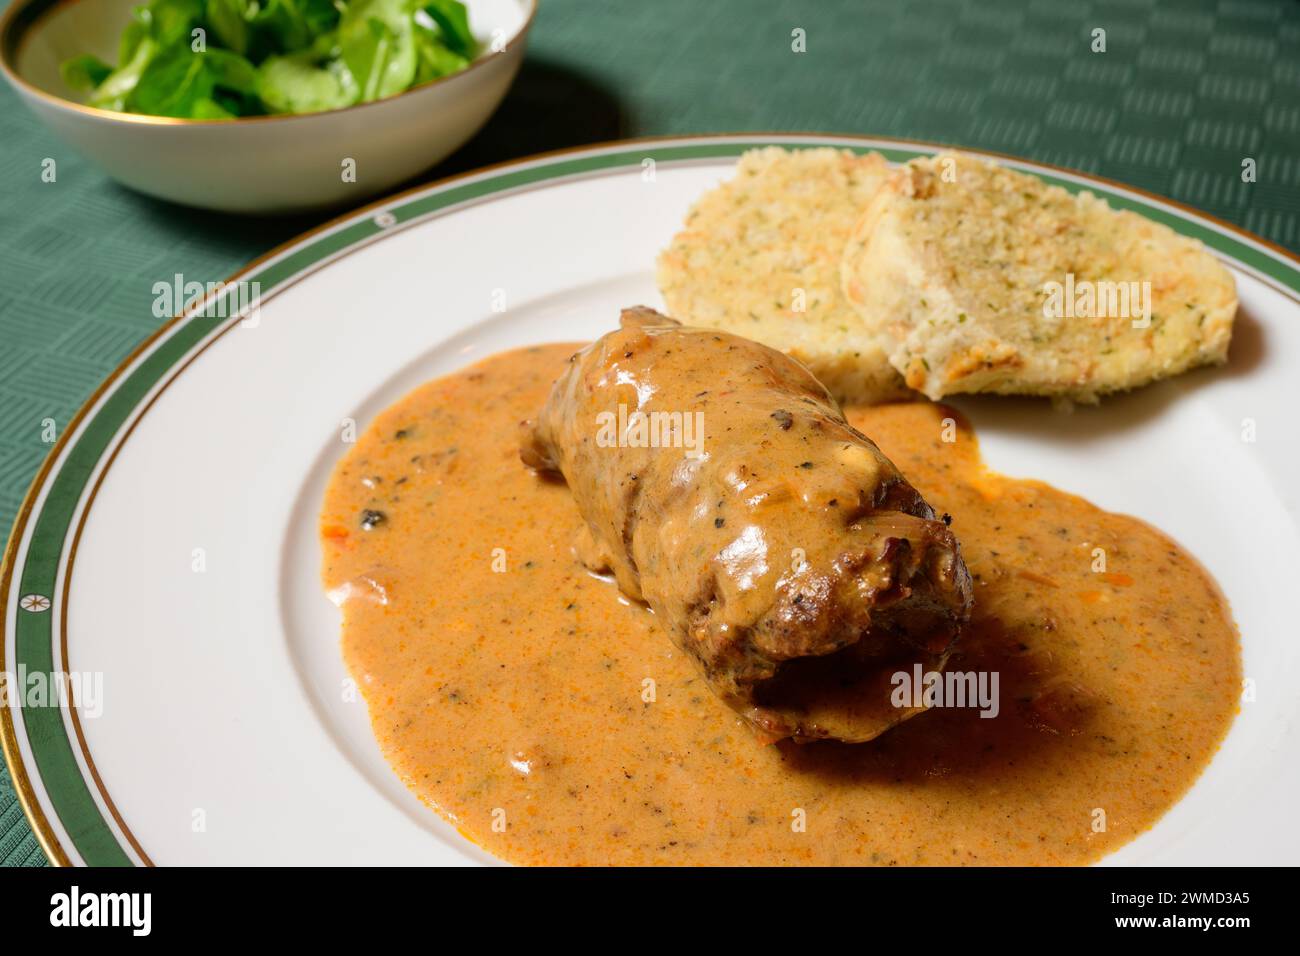 Beef Roulade or Rindsroulade with Semmelknodel Dumpling, Sour Cream Gravy with Green Field Salad Stock Photo